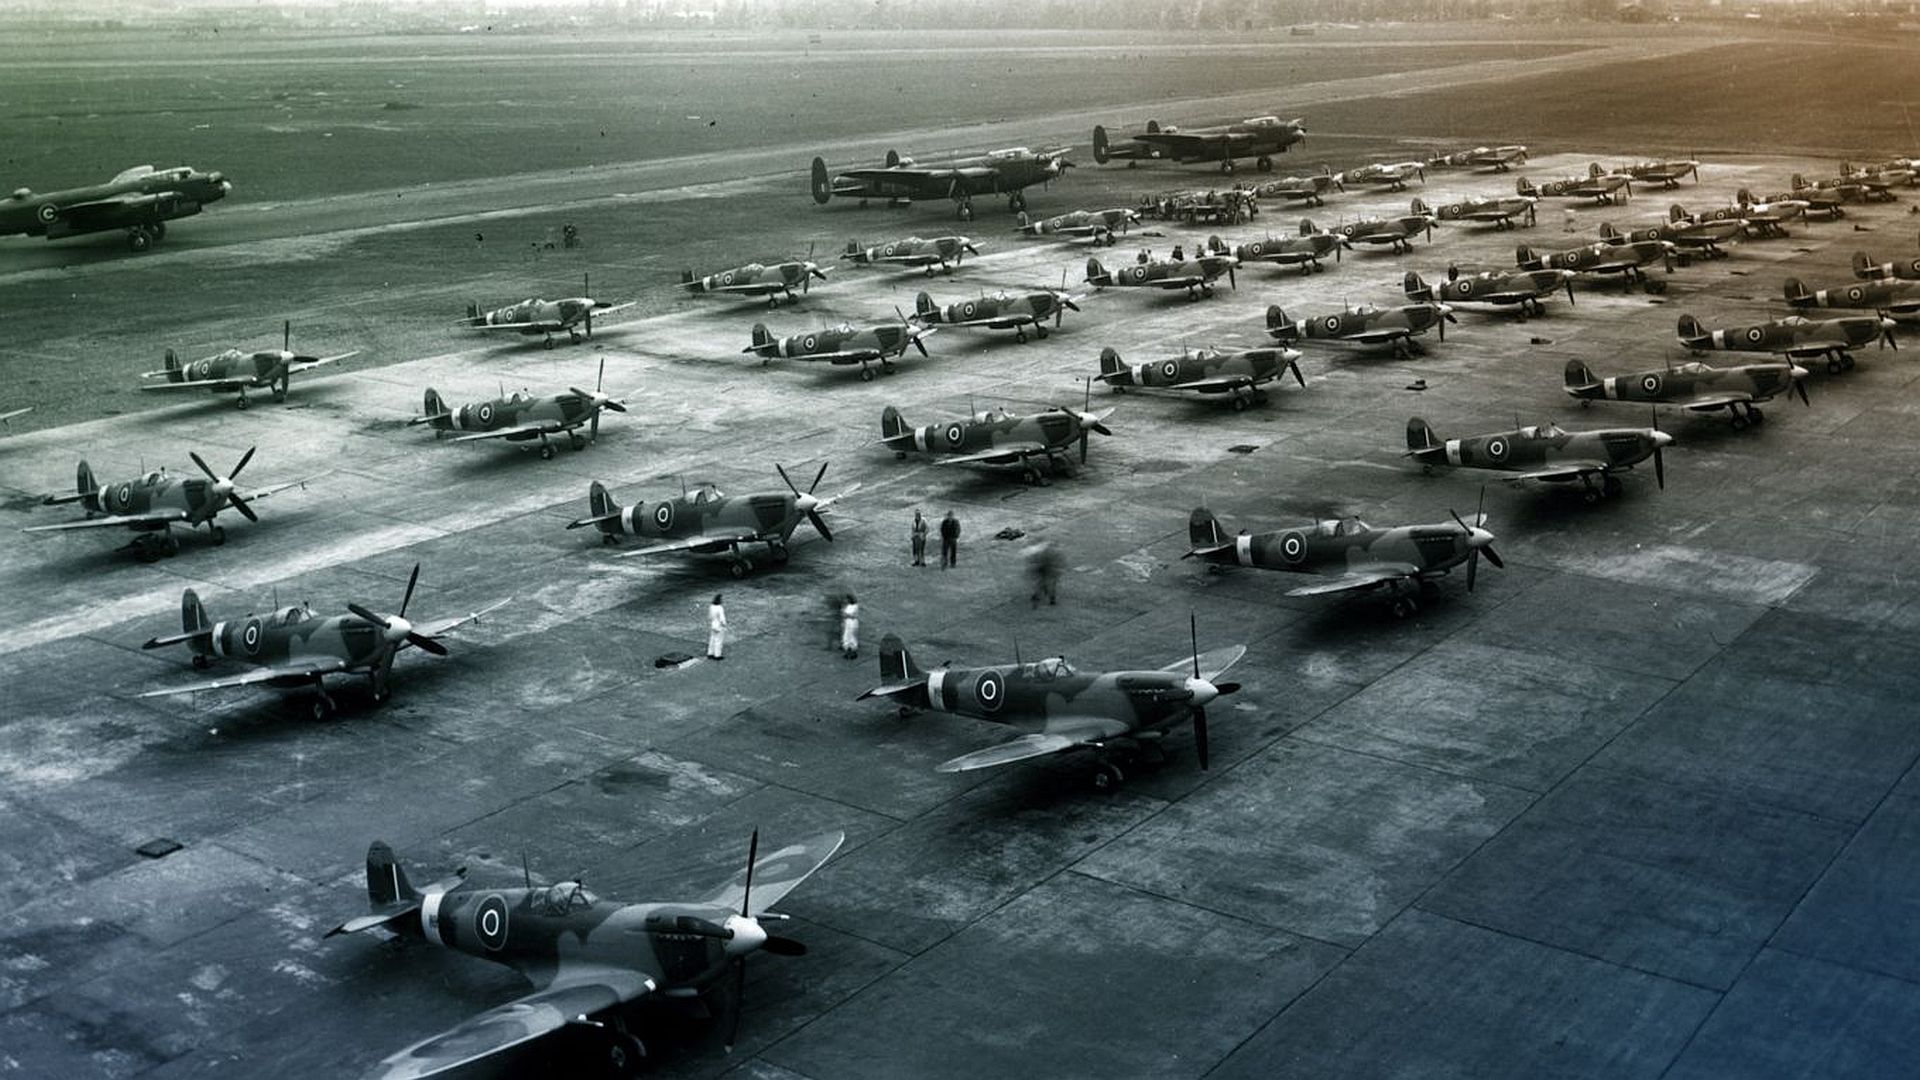 New Spitfires Are Lined Up Ready For The RAF